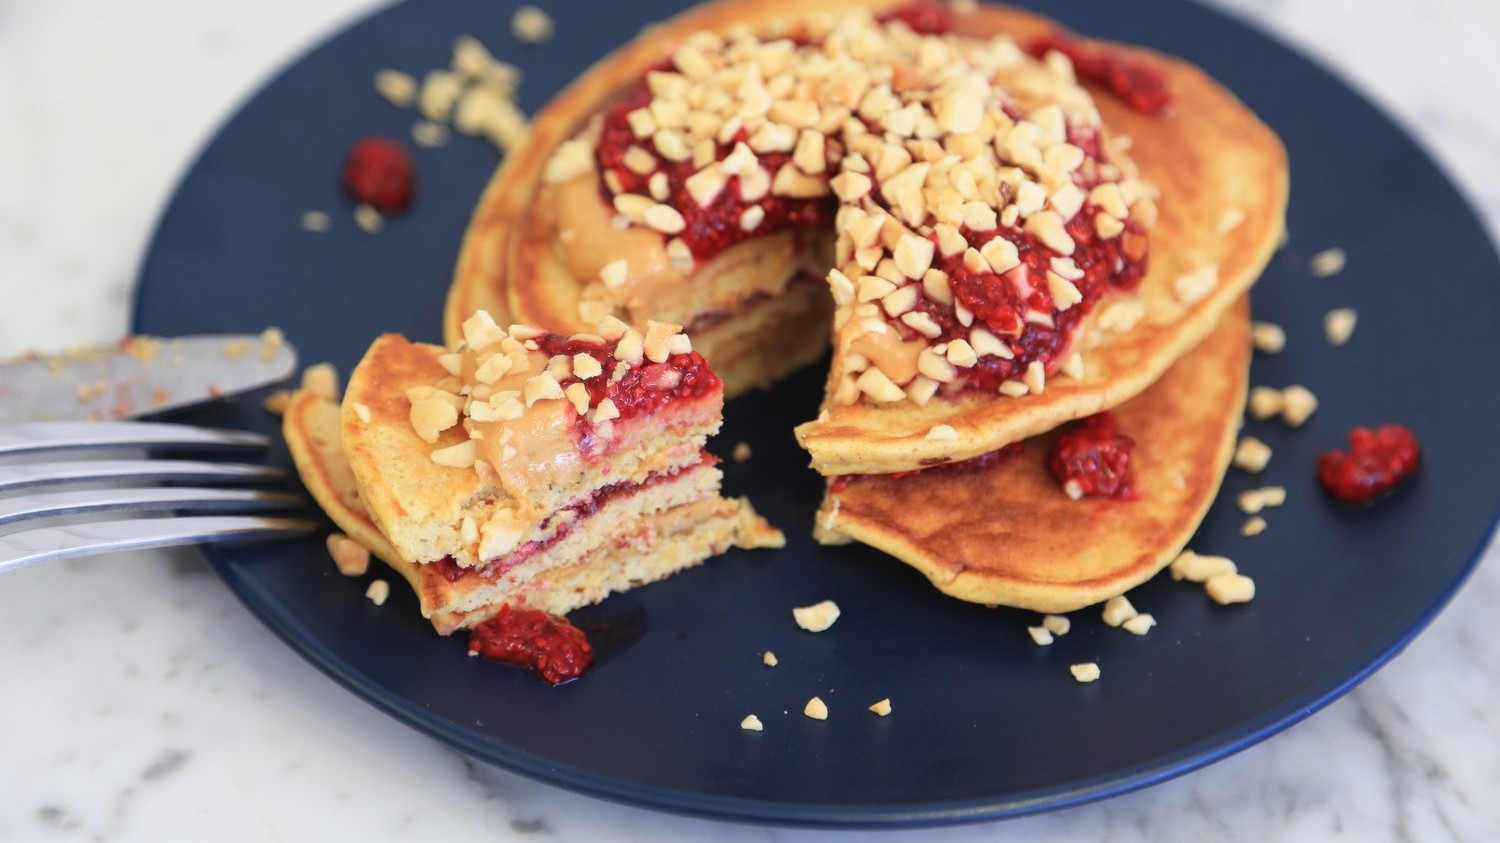 Image of Peanut Butter & Jelly Protein Pancakes